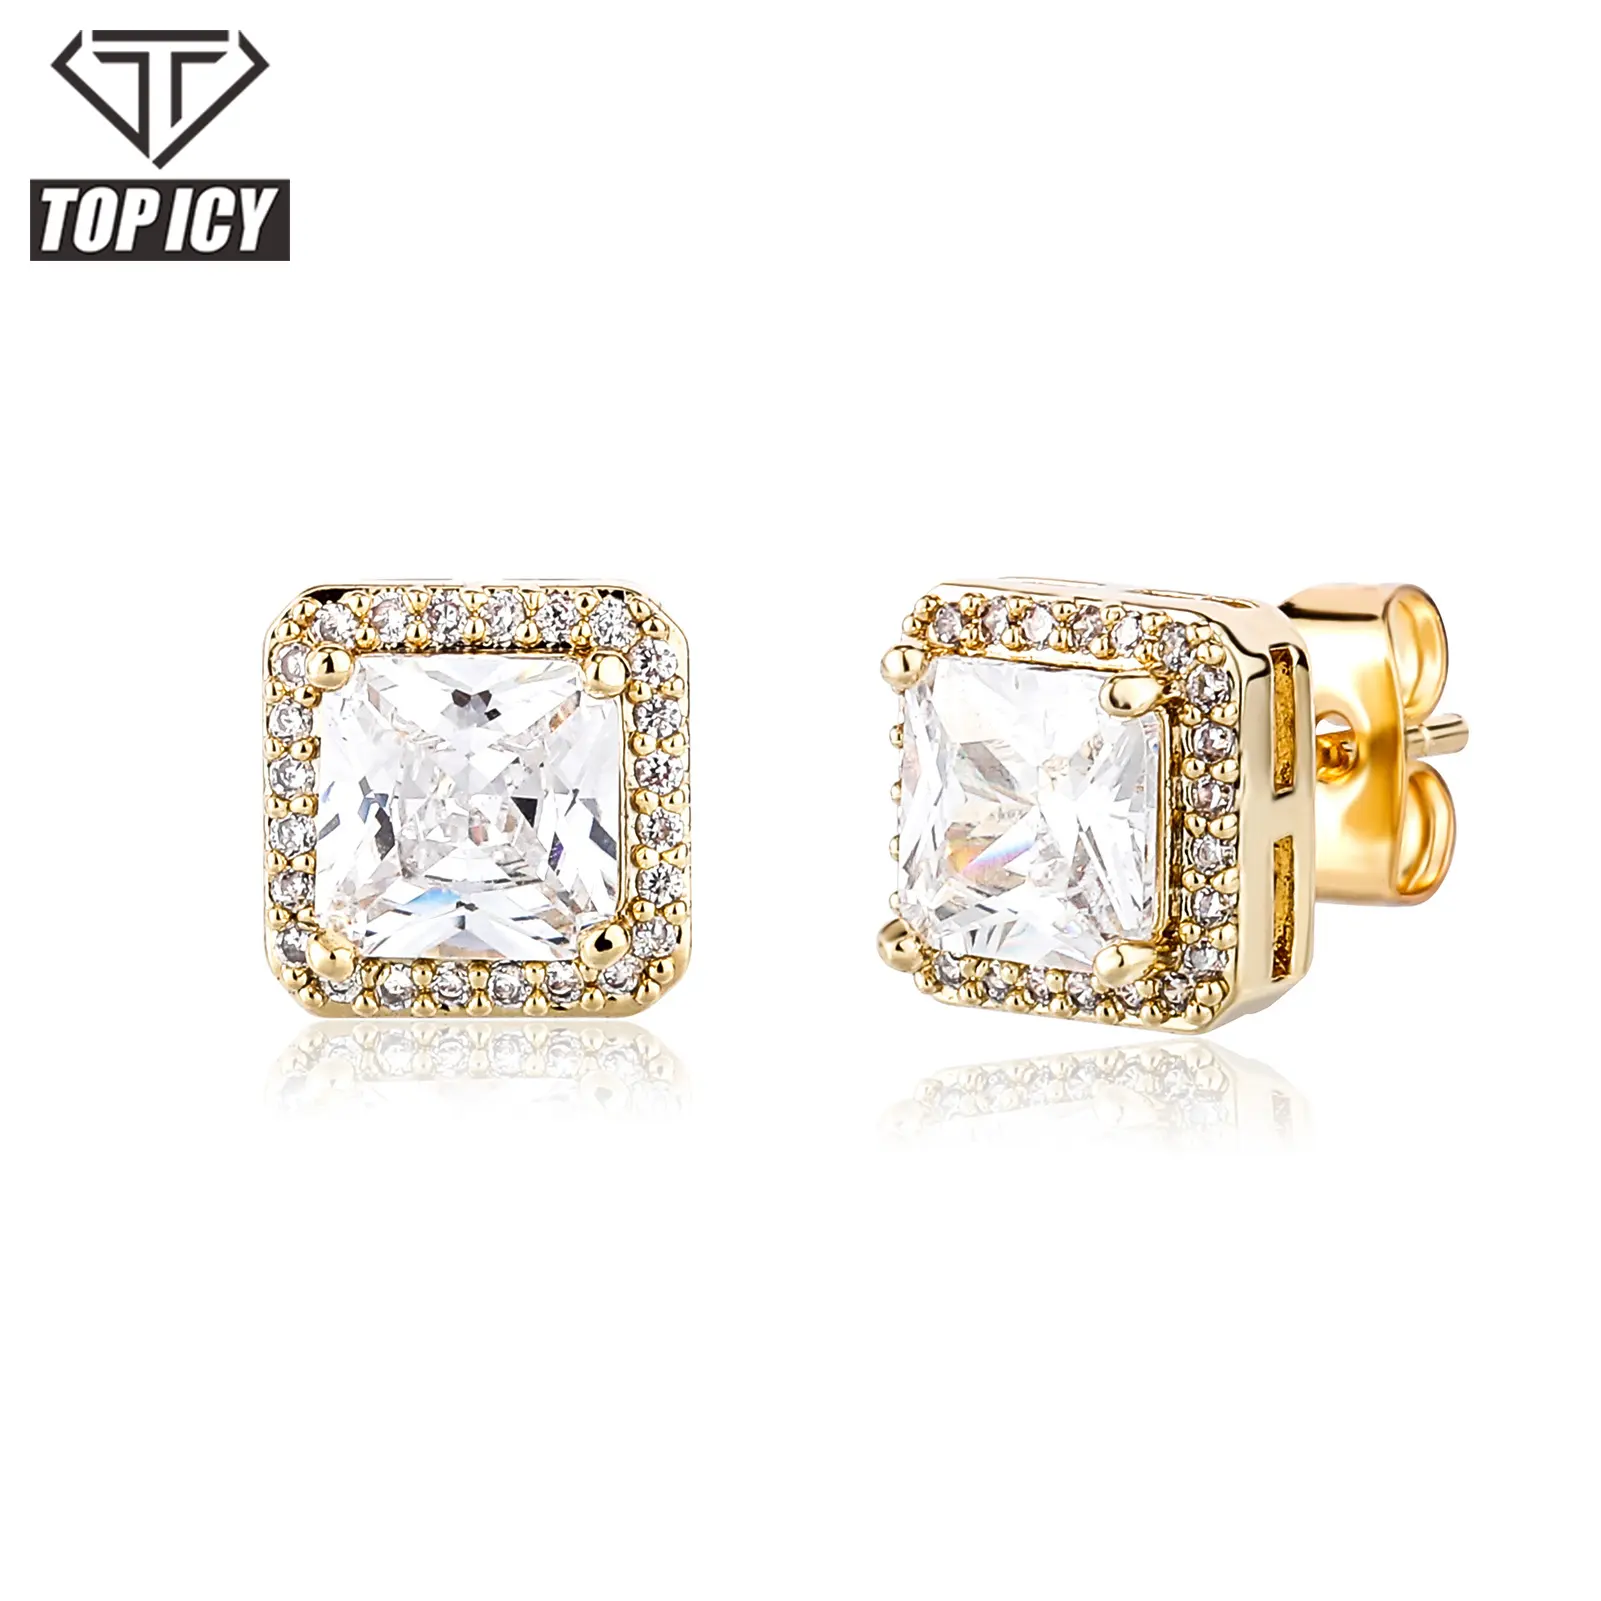 Top Icy Fashion Jewelry Iced Out Big Square Earrings Studs Gold Plated AAA Cubic Zircon Earrings For Women Emerald Jewelry Studs